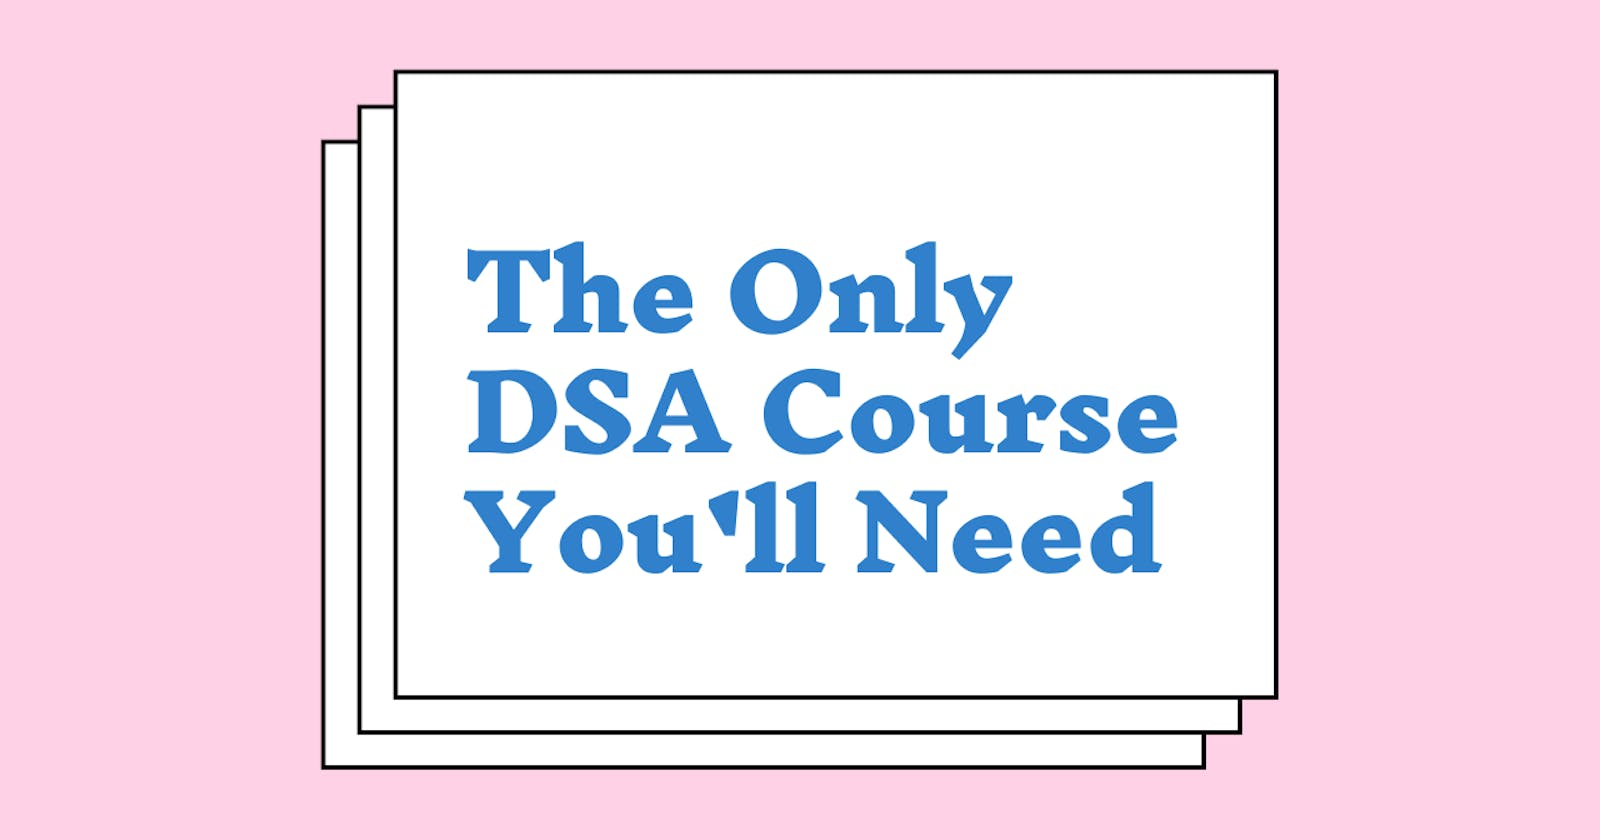 The Only DSA Course You'll Need